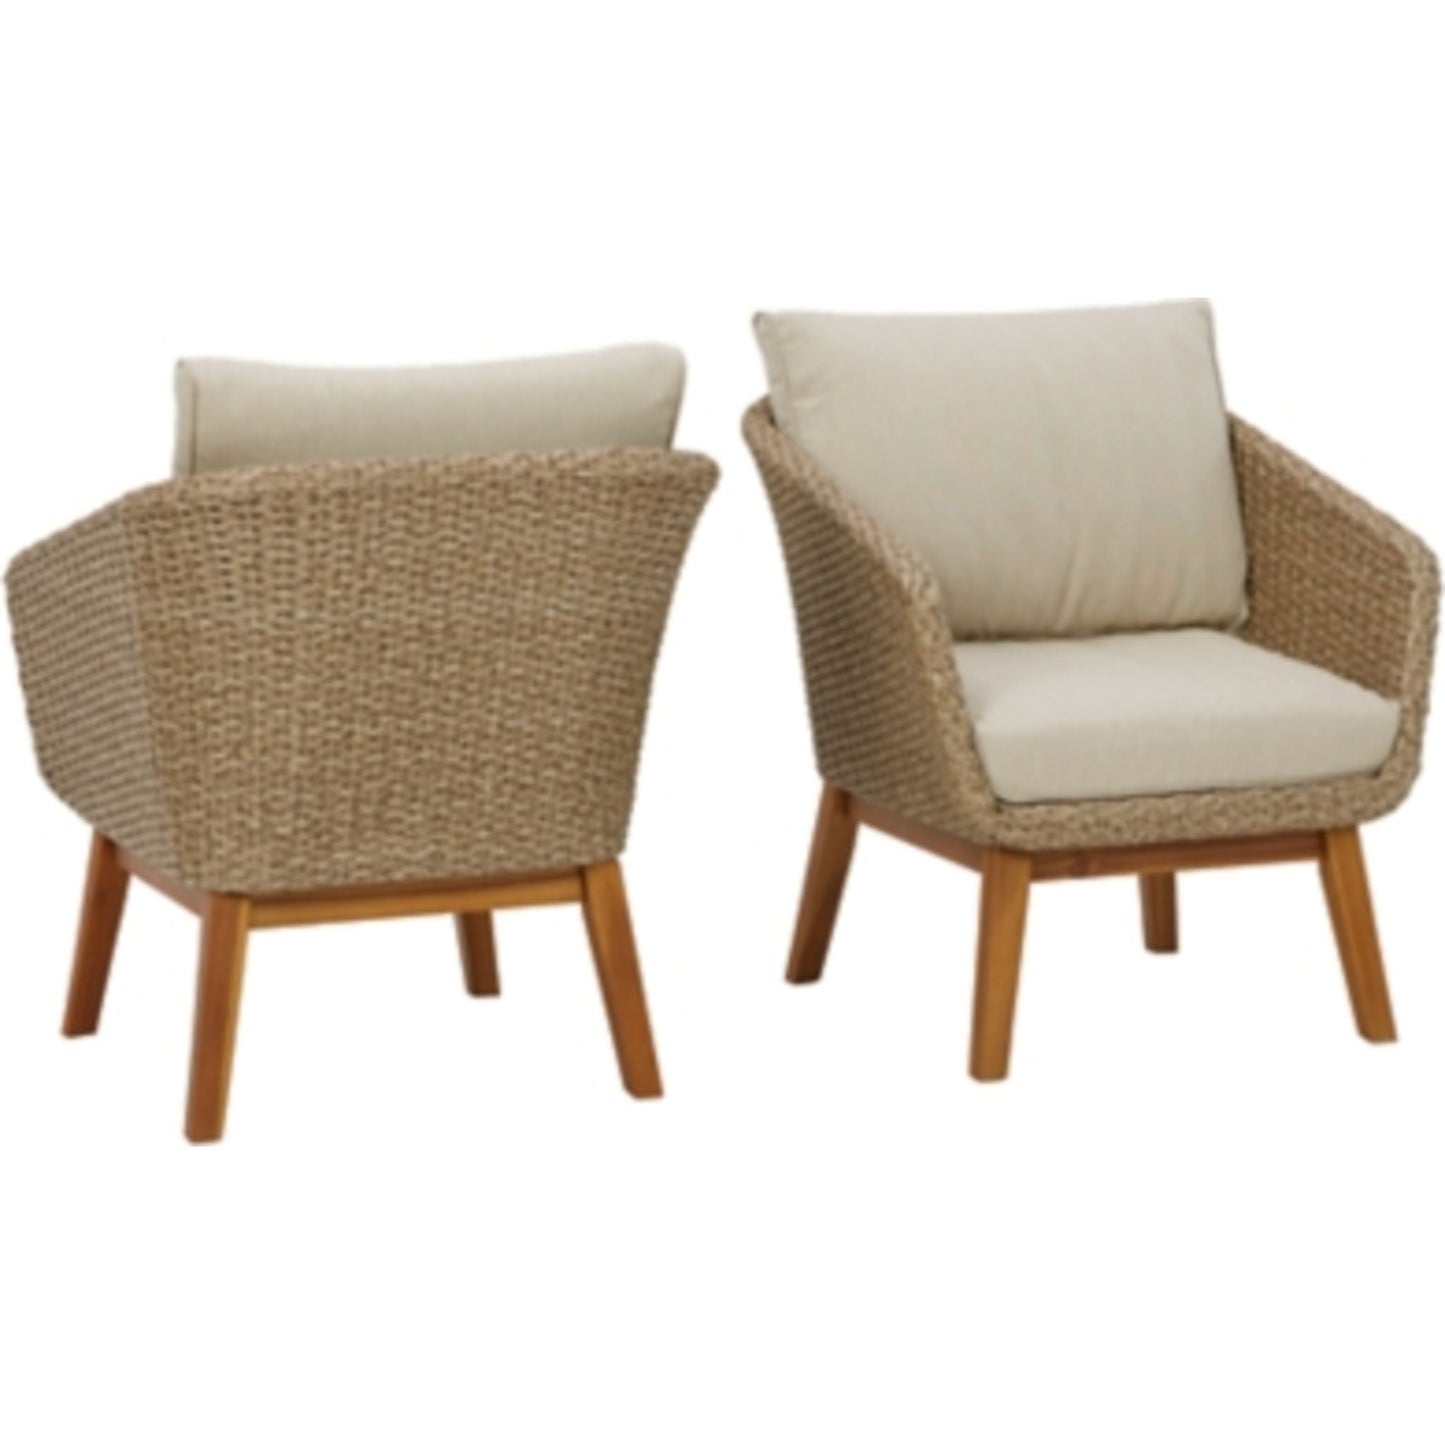 Outdoor Crystal Cave Lounge Chair-Set of 2 Beige